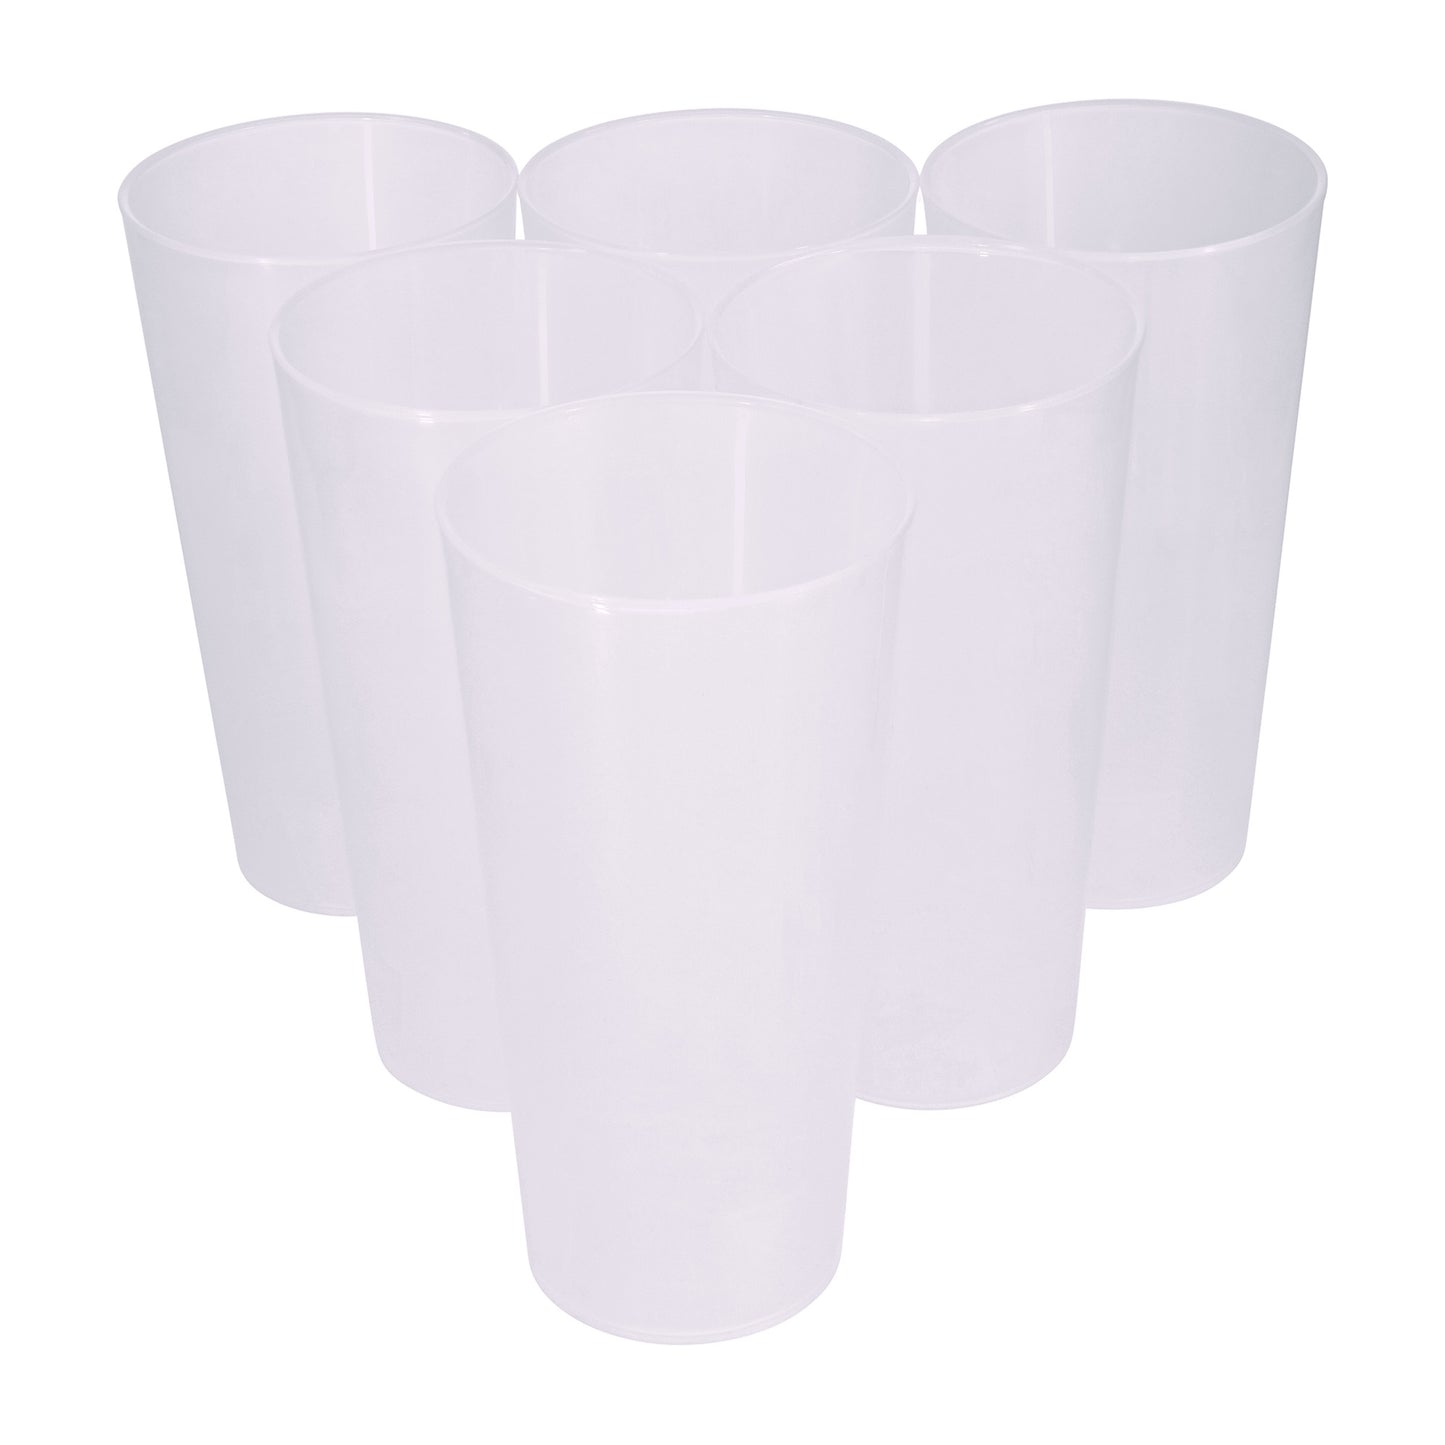 Pack of 50 Pint Cups Reusable Plastic - 1 Pint 568ml 20oz